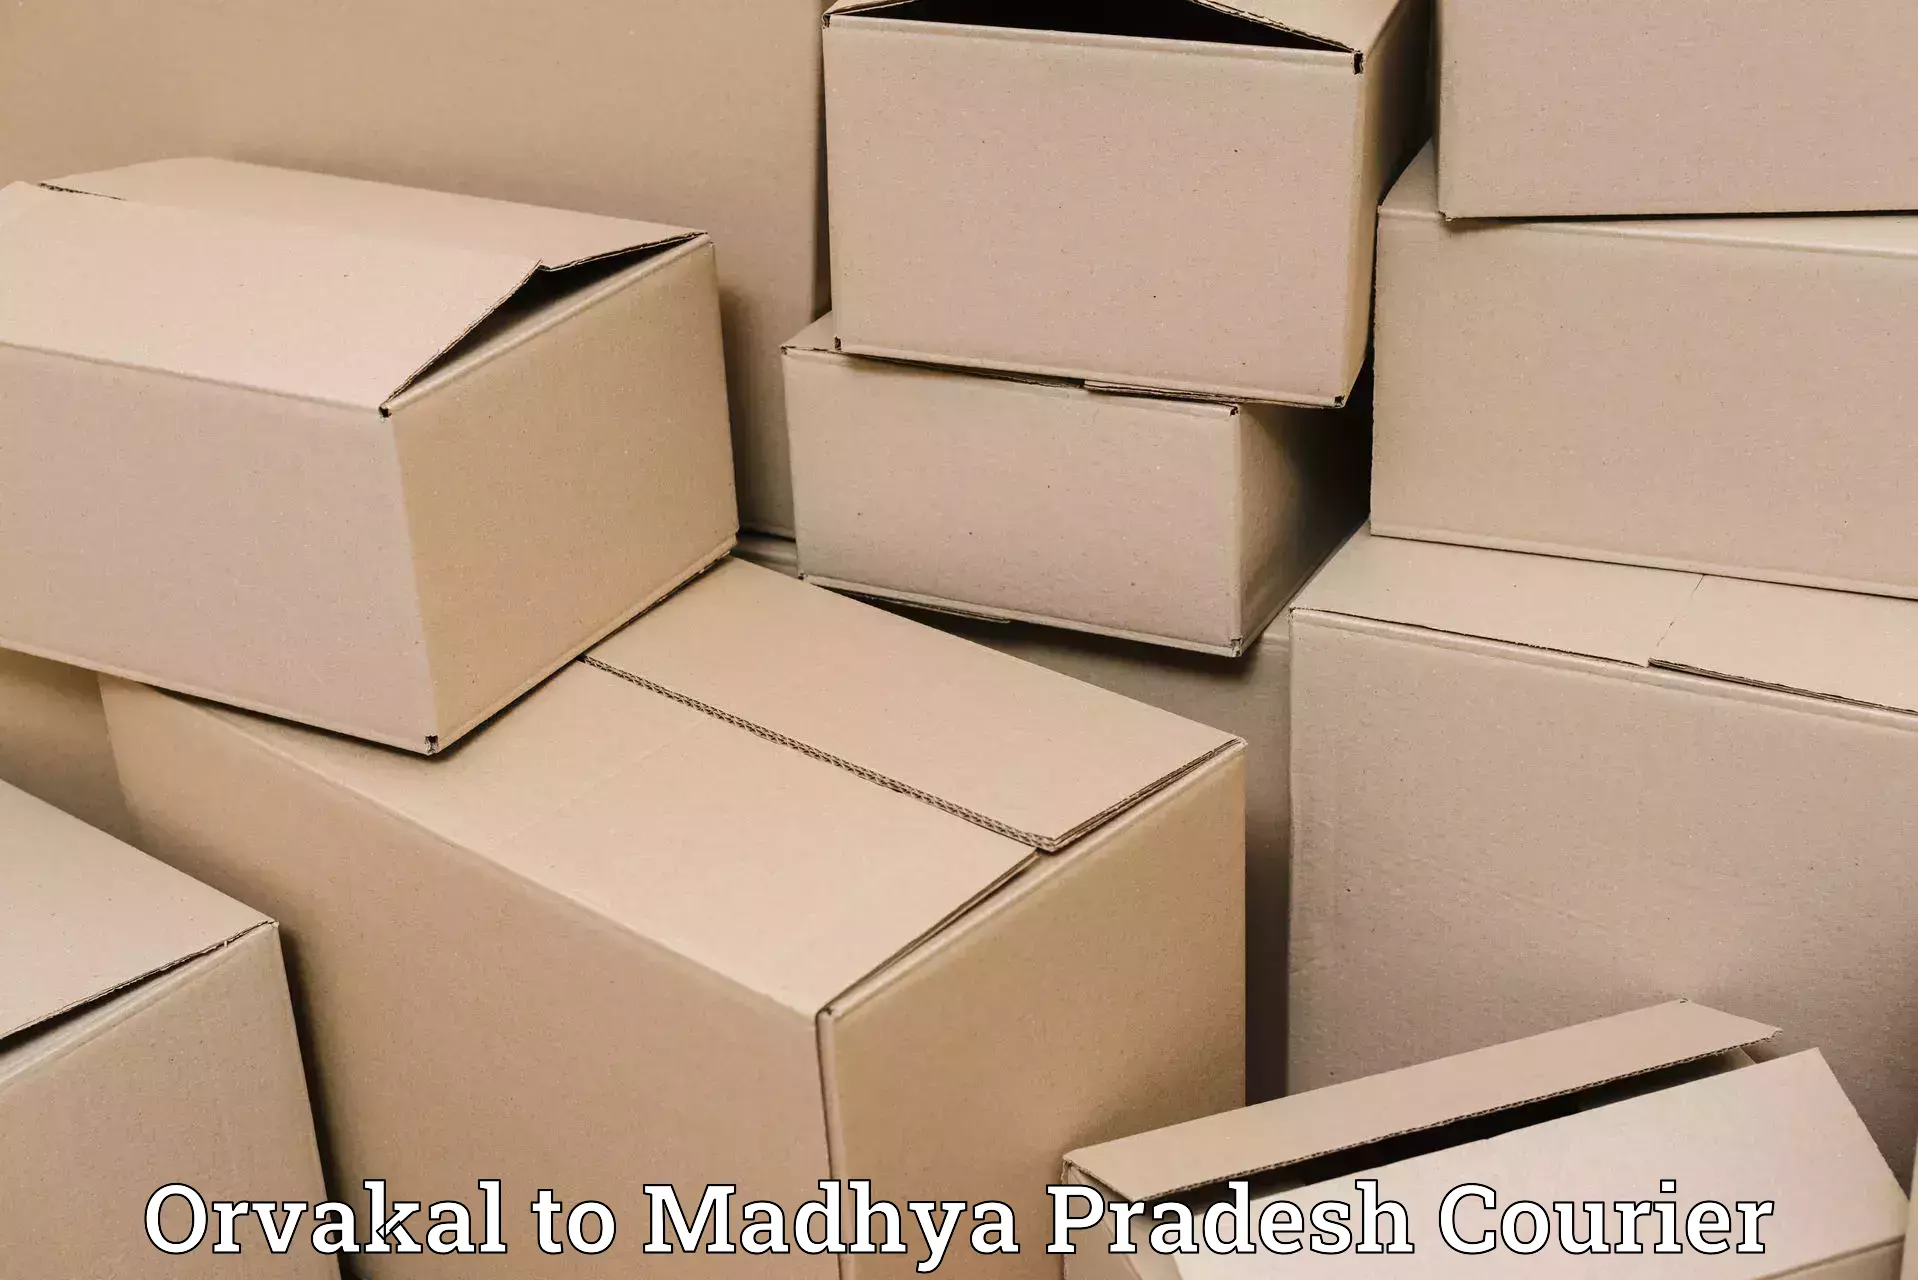 Nationwide courier service Orvakal to Burhanpur